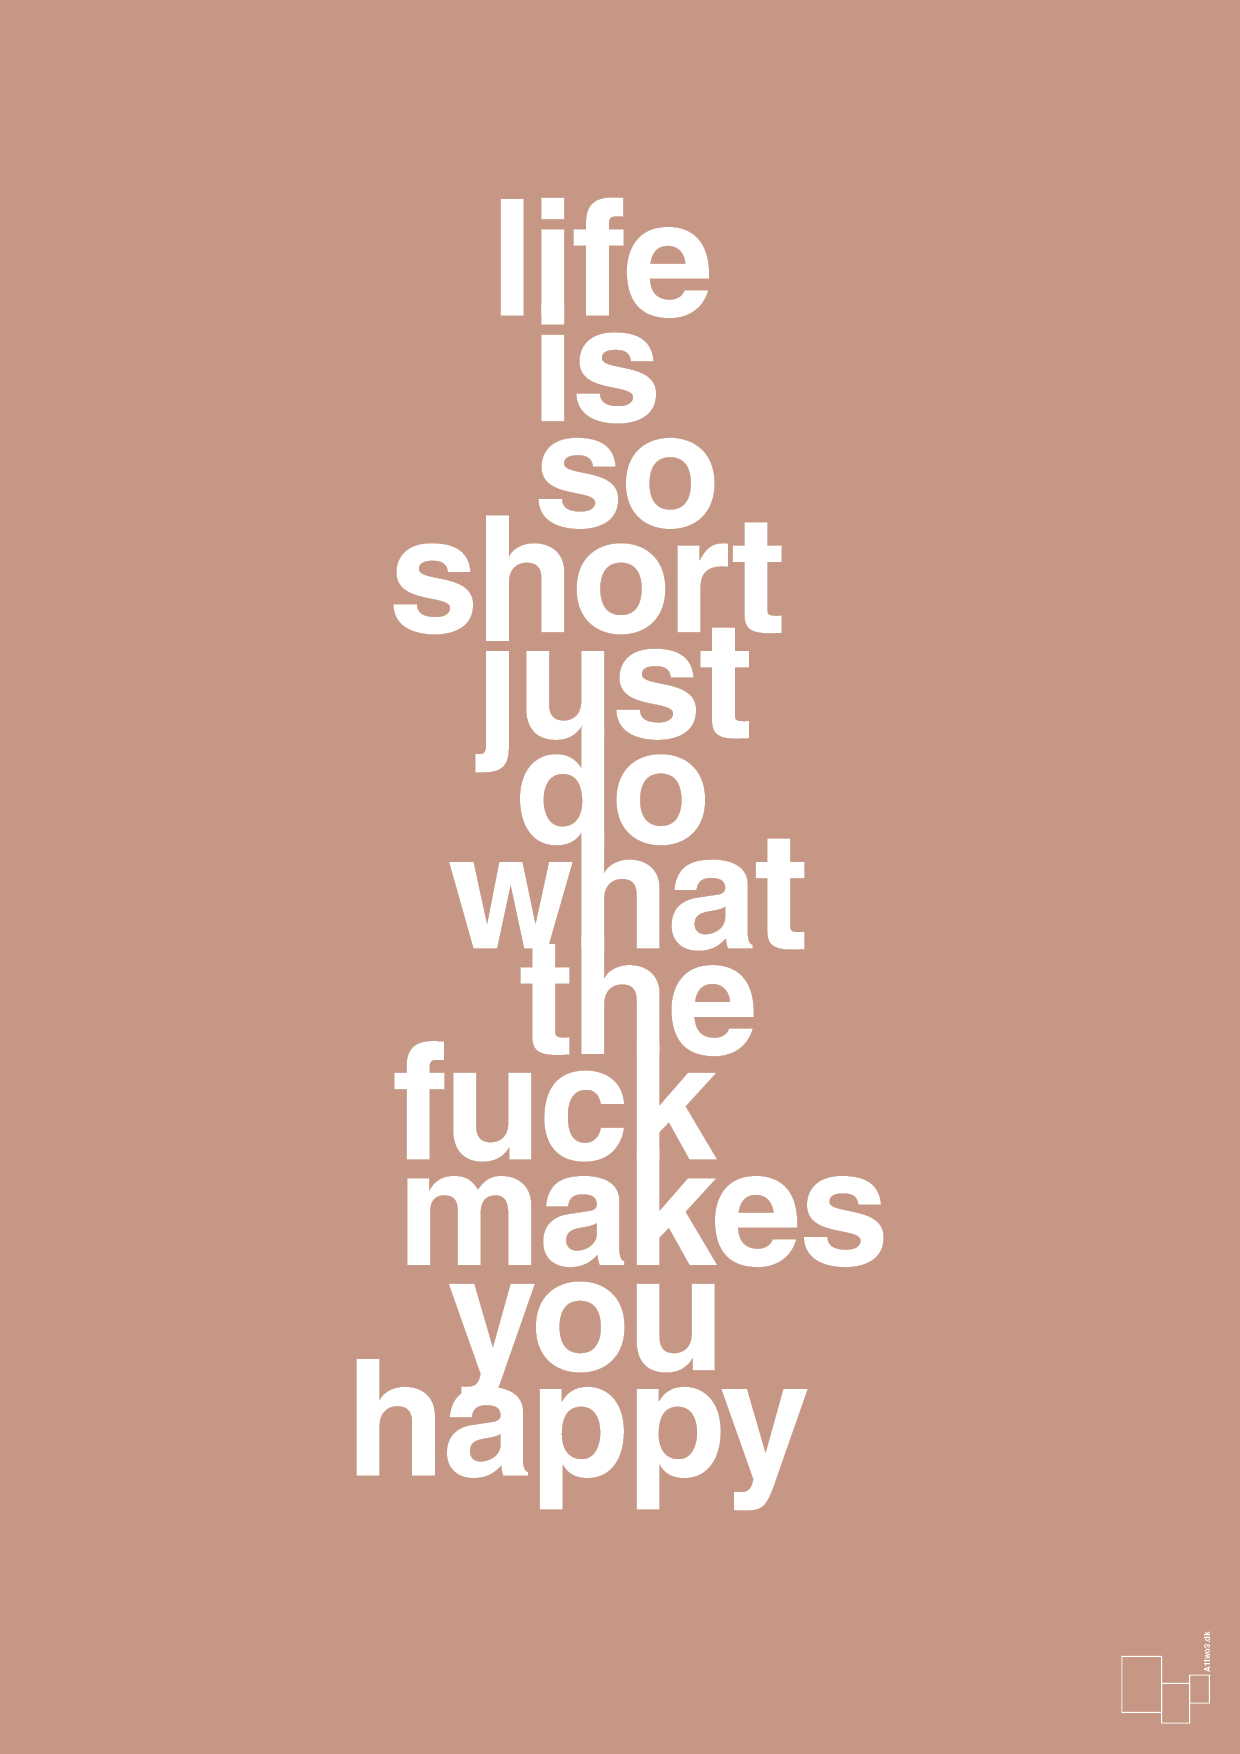 life is so short just do what the fuck makes you happy - Plakat med Ordsprog i Powder